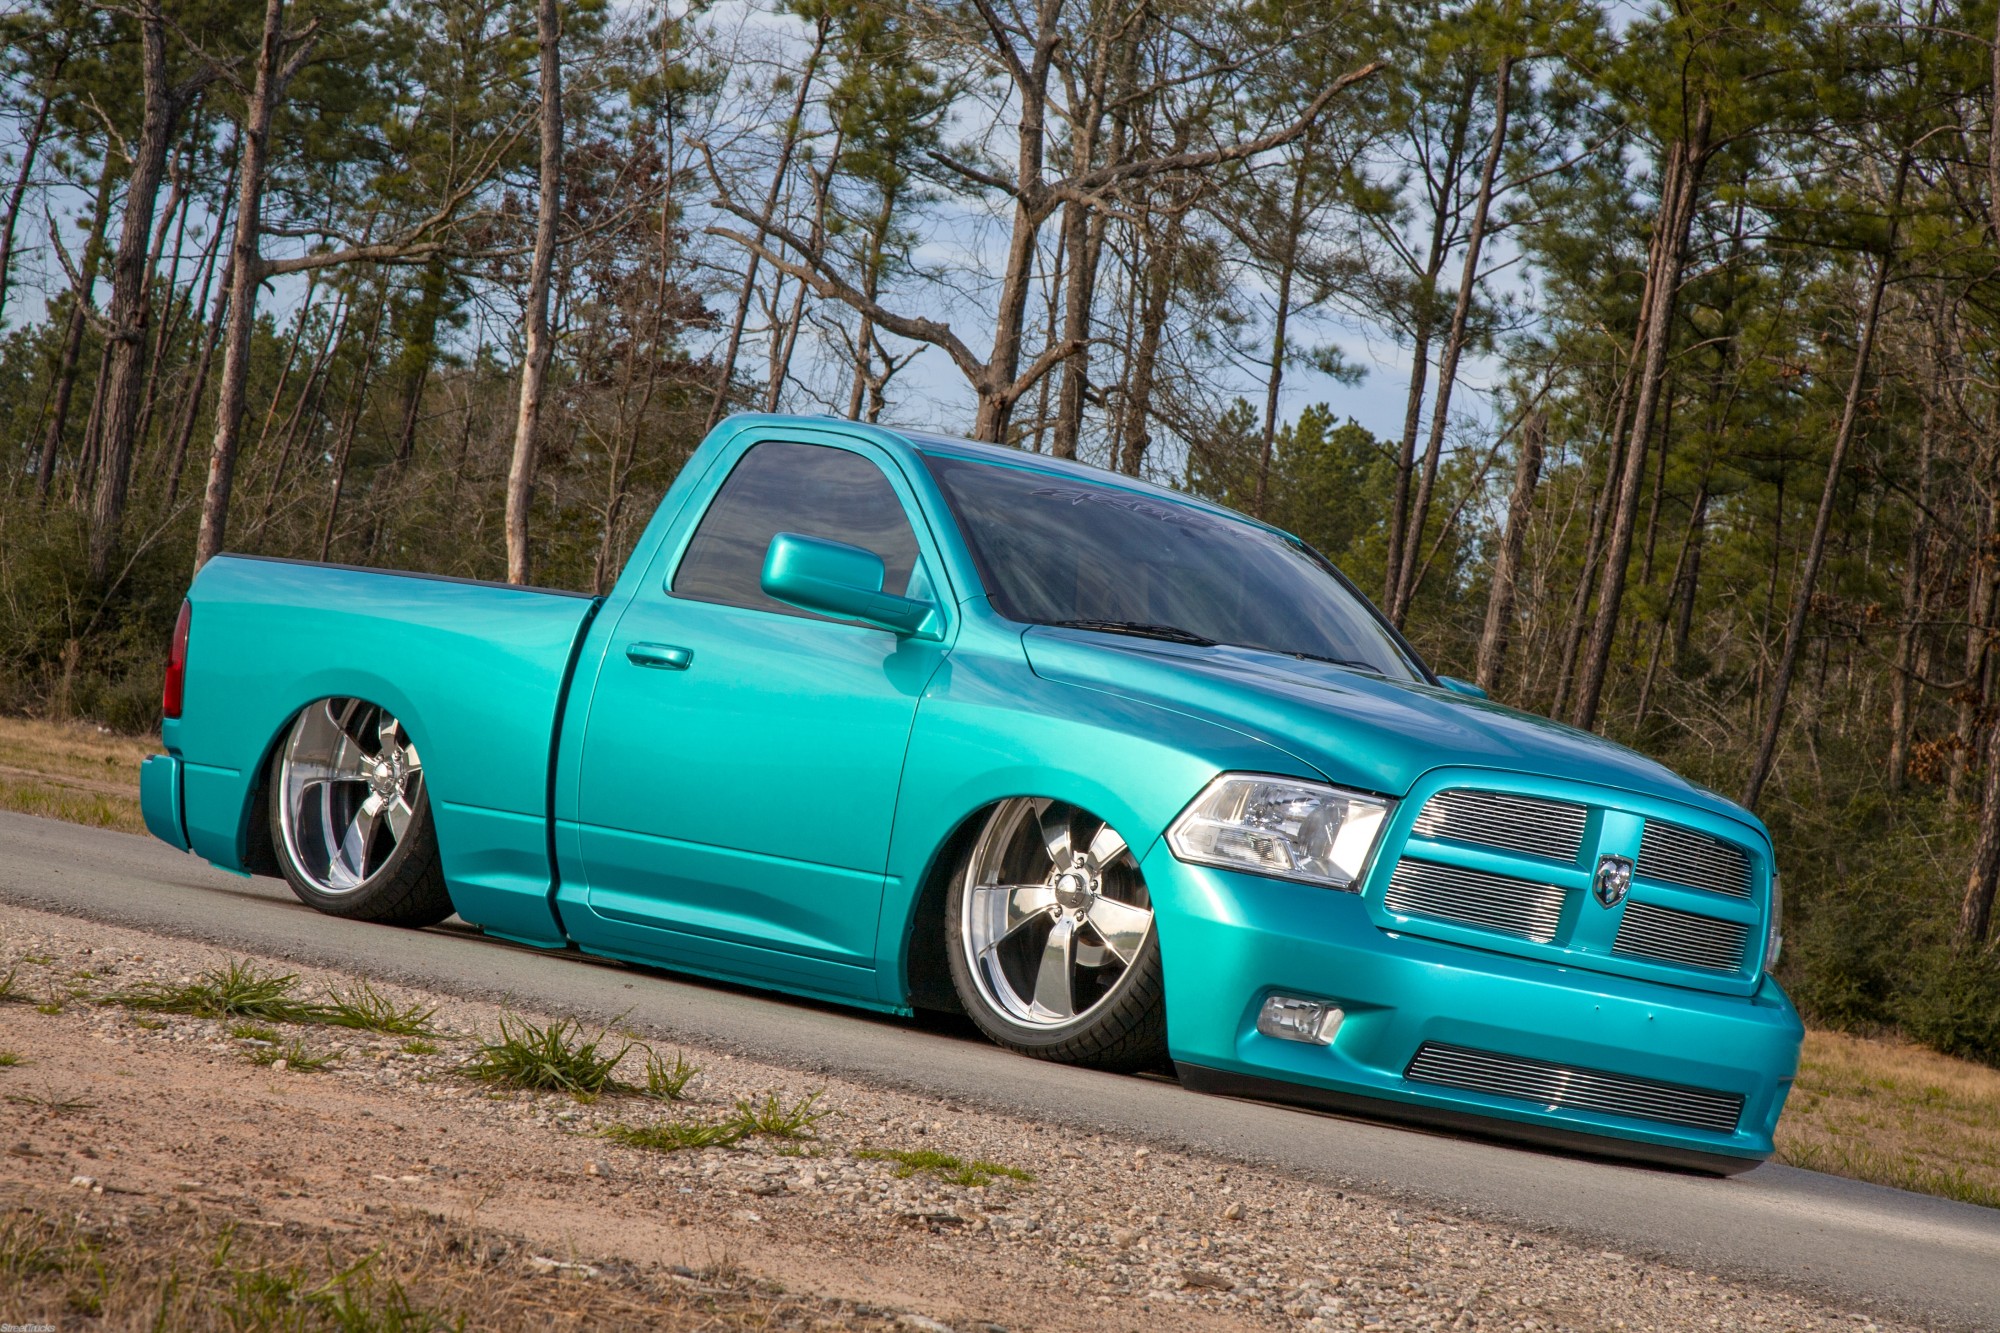 Watch Out Bumps. 16 of the Most Slammed Rides